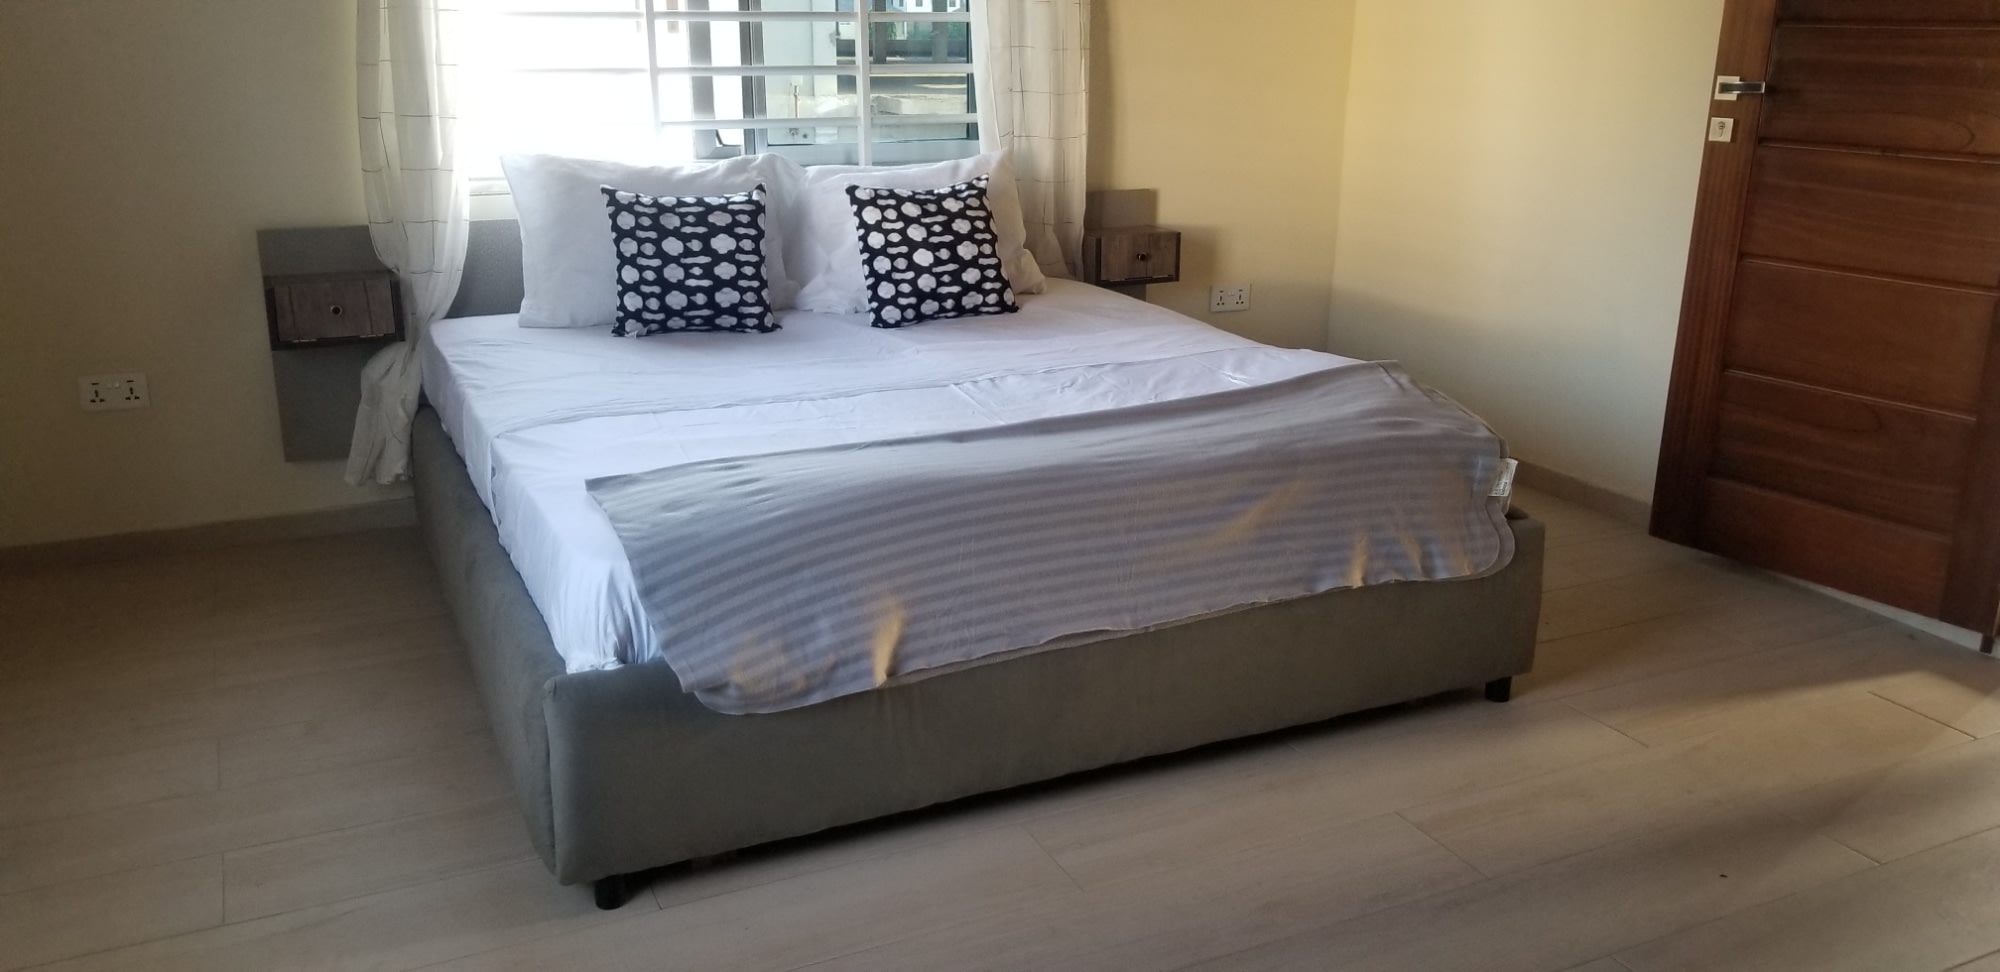 Two 2-Bedroom Furnished Apartment for Rent at Spintex